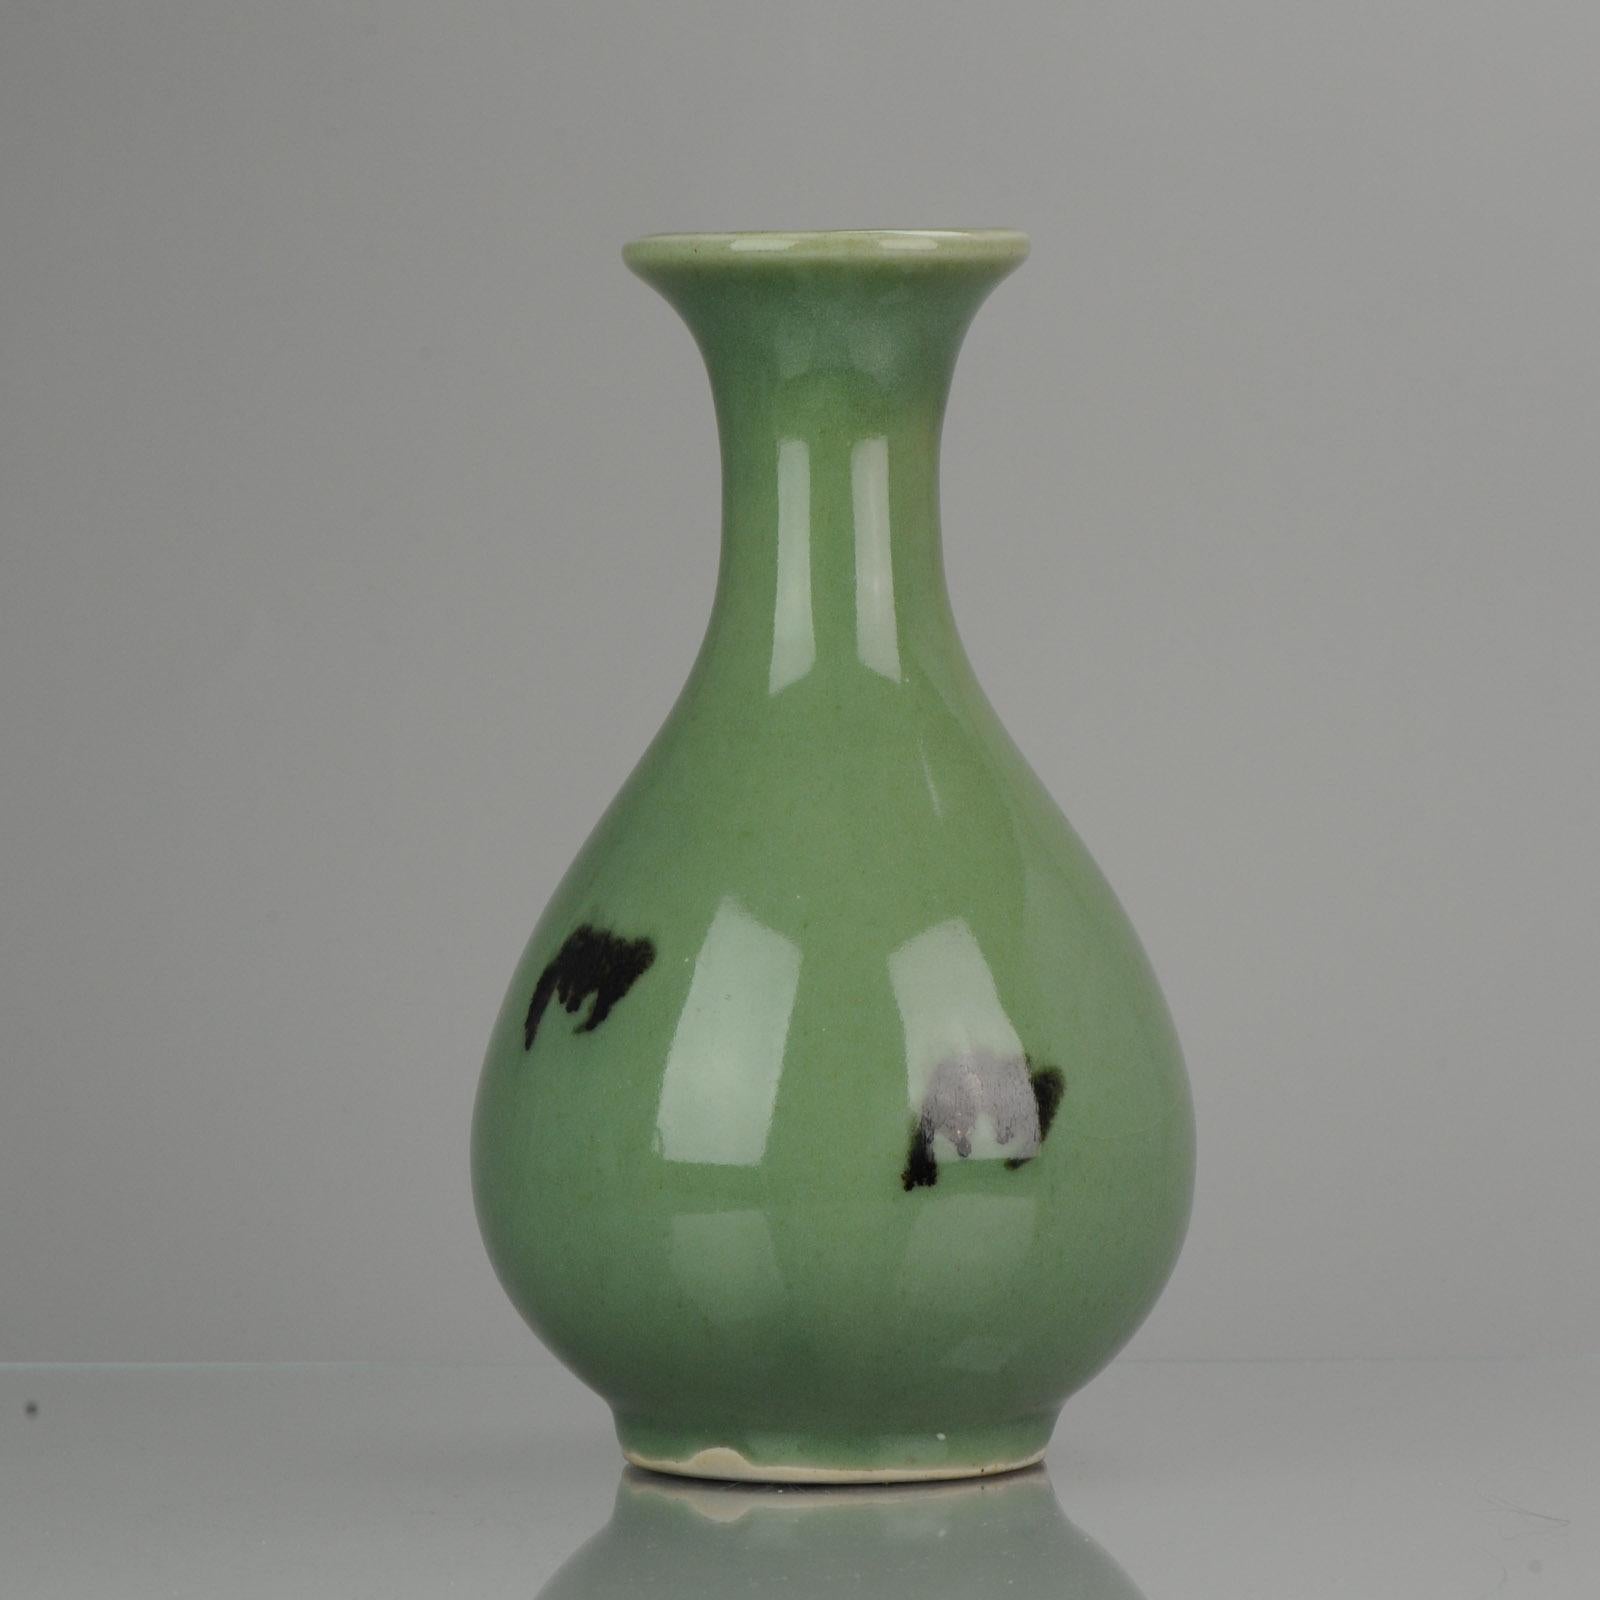 Very nice vase, high quality glazing. Most likely 20th century.

Condition
/ / Overall Condition 2 firing bubbles to mouth, some crackle lines to base and a section on the body. Size 265mm high
Period
20th century PRoC (1949 - now).